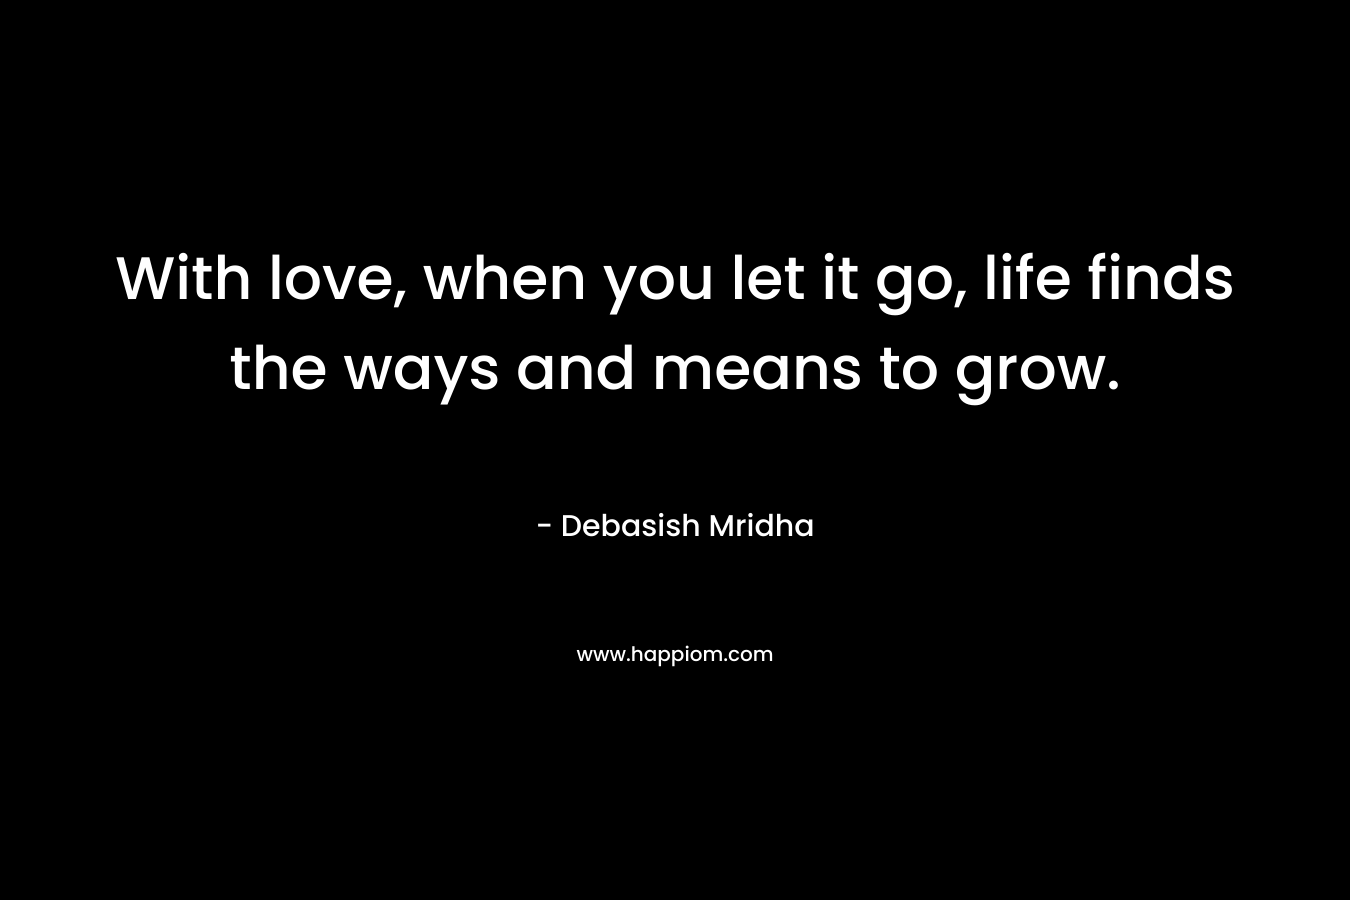 With love, when you let it go, life finds the ways and means to grow.